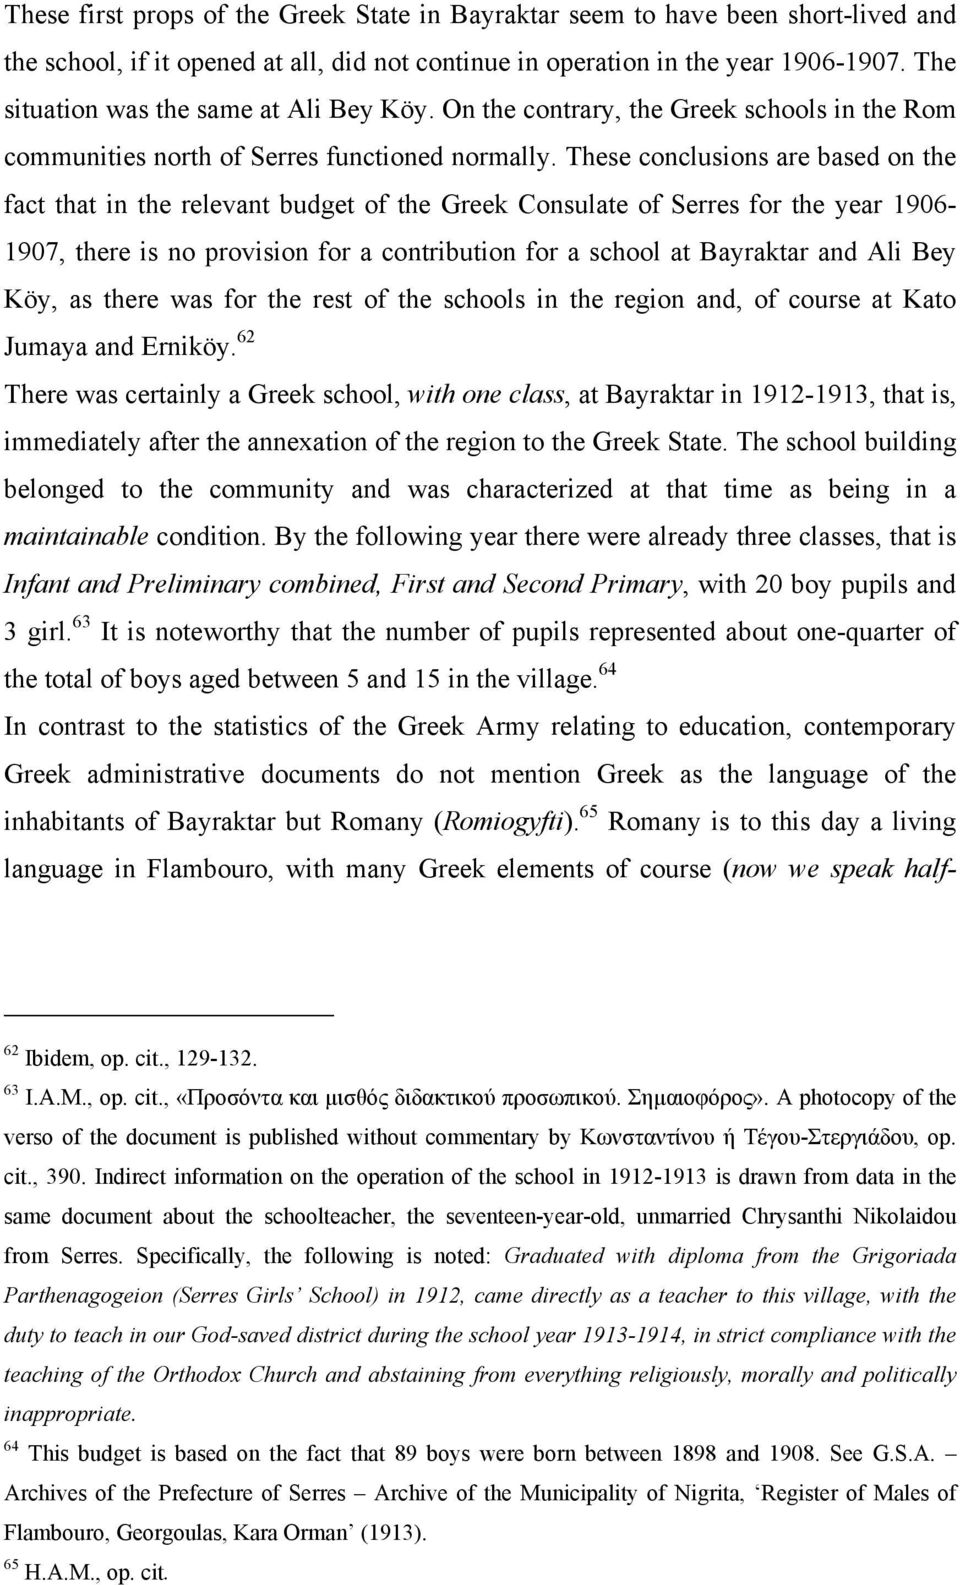 These conclusions are based on the fact that in the relevant budget of the Greek Consulate of Serres for the year 1906-1907, there is no provision for a contribution for a school at Bayraktar and Ali